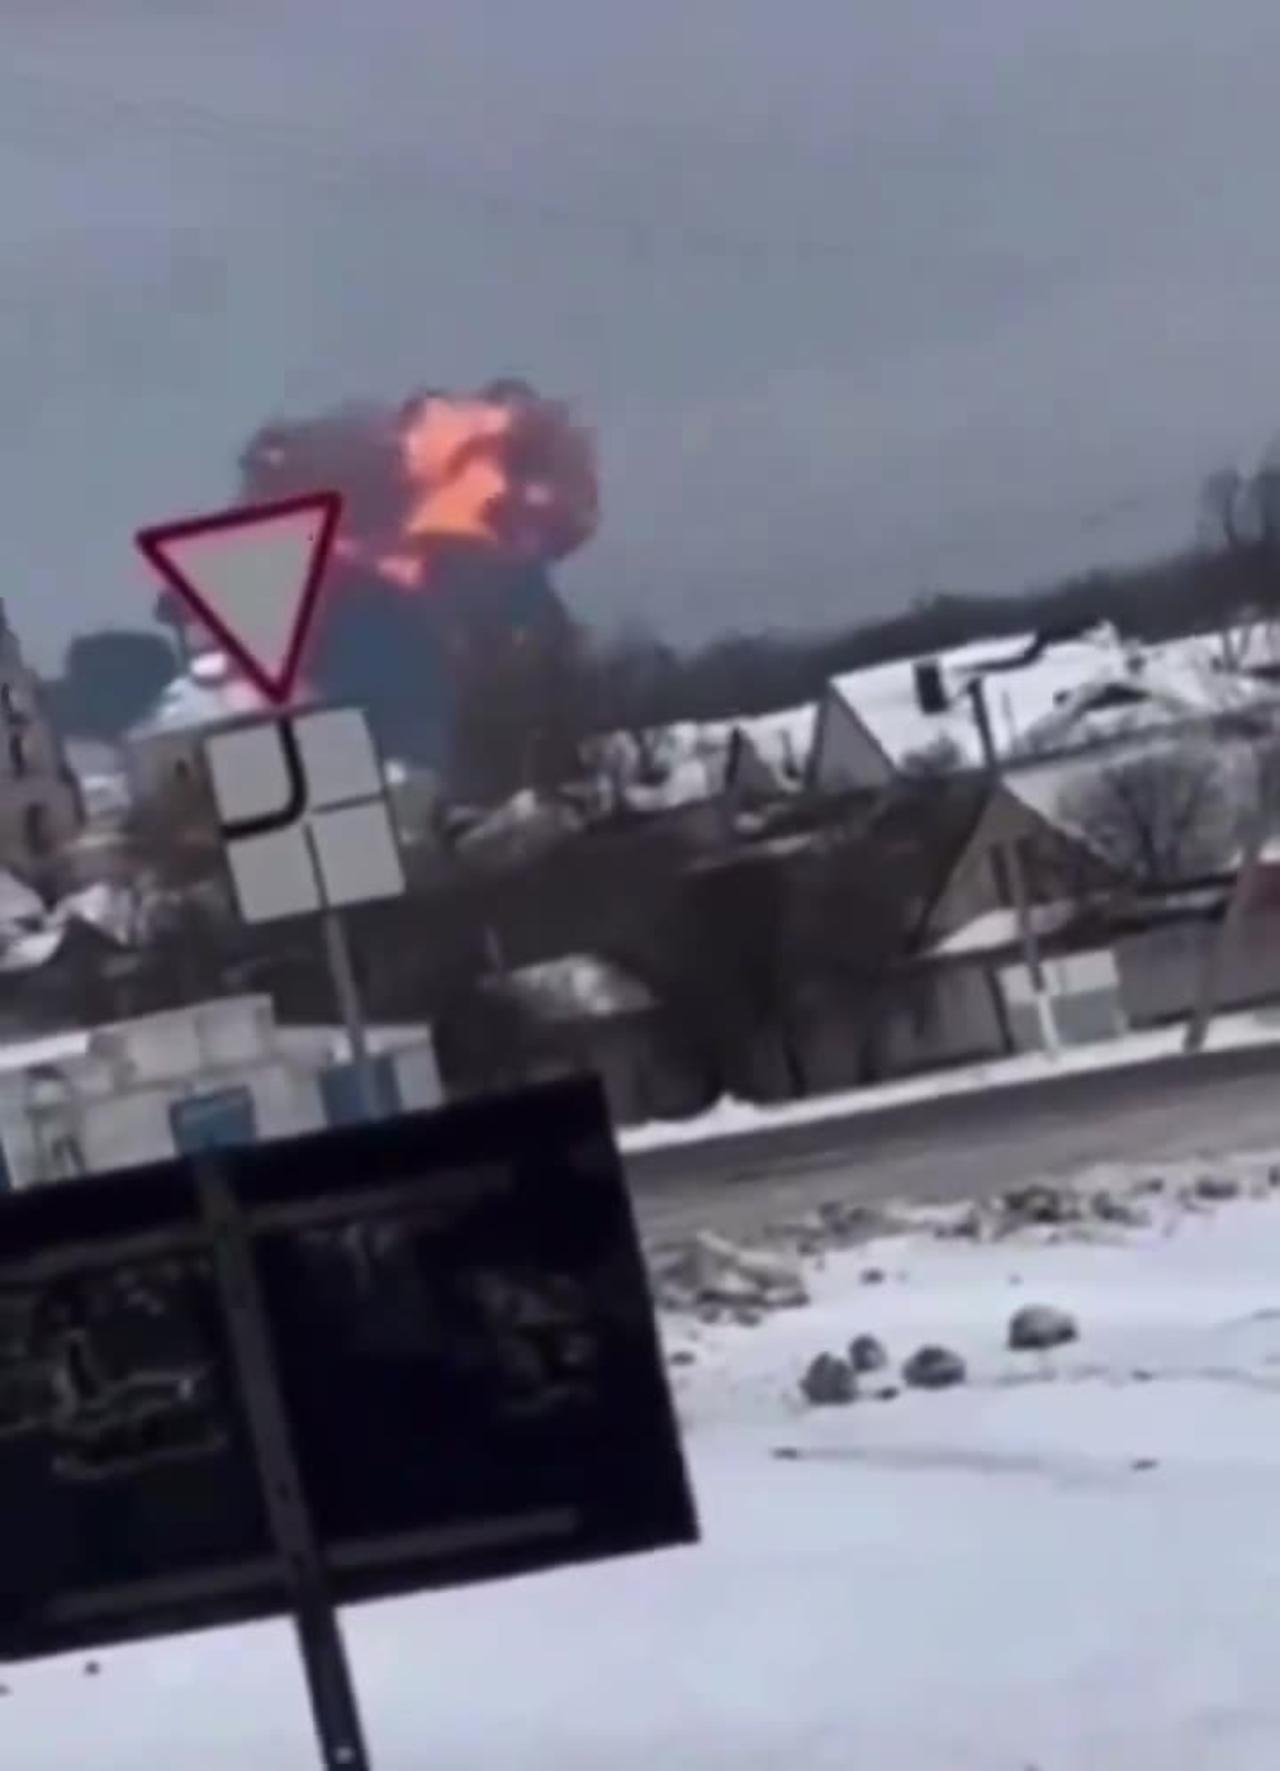 Ukraine just shot down a Russian Airliner that was flying to Ukraine for a prisoner swap.